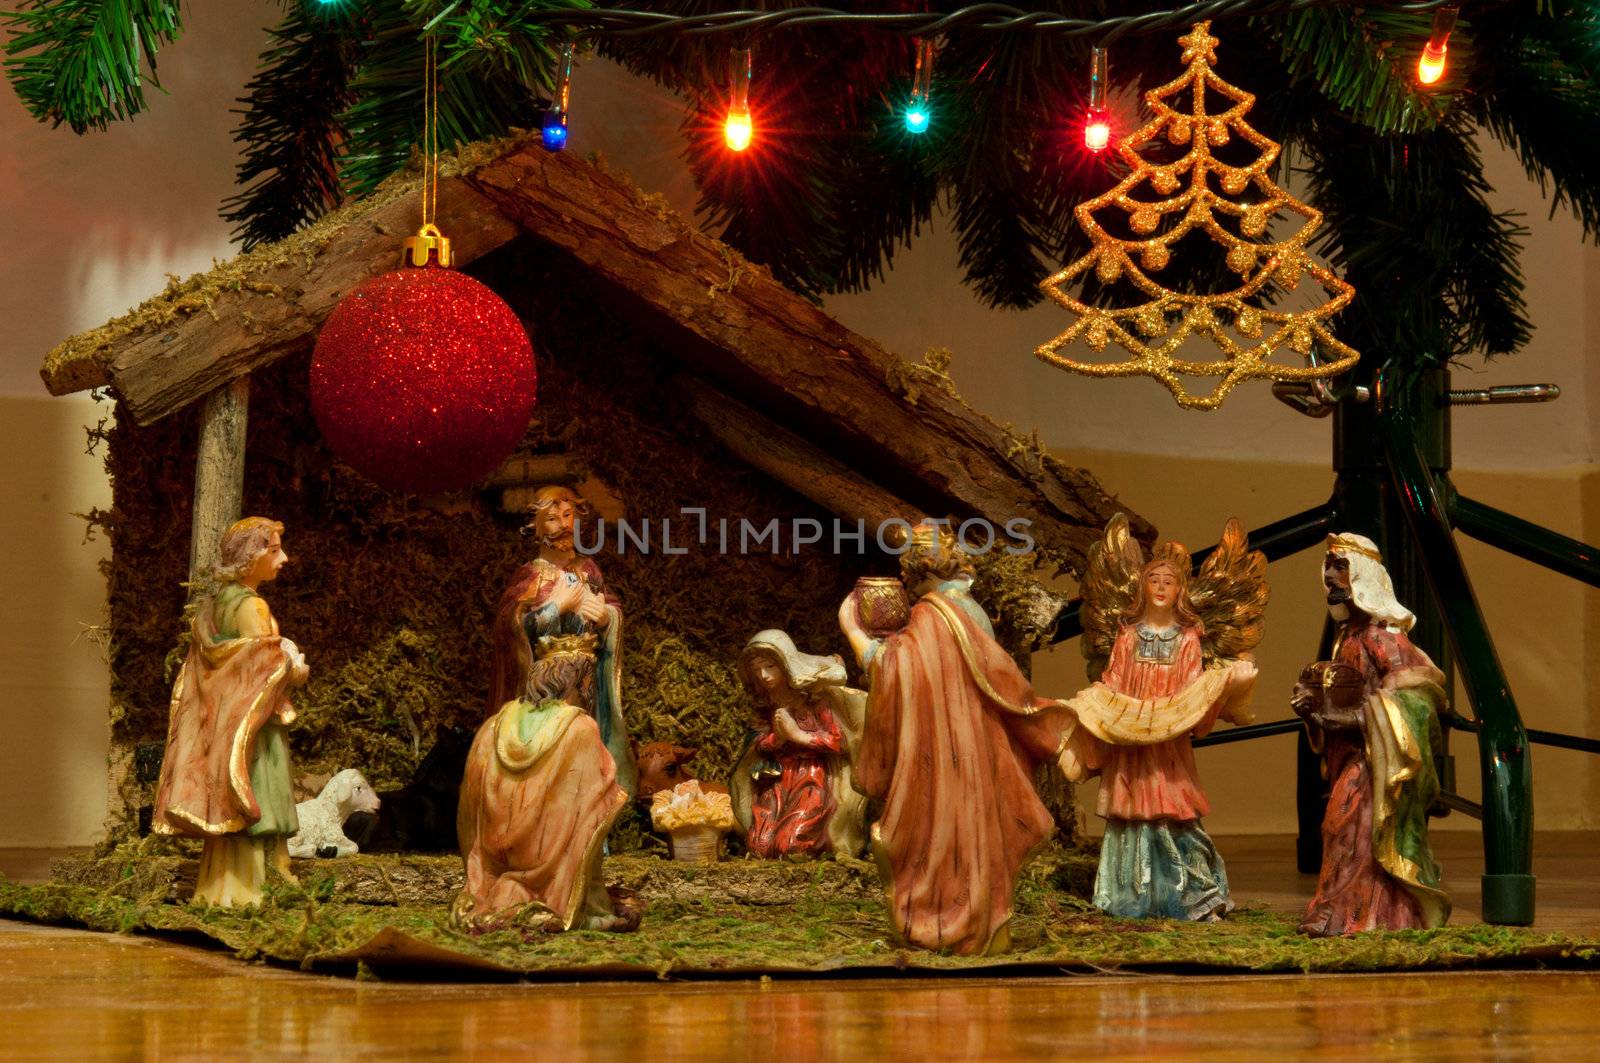 christmas nativity scene with hand-colored ceramic figures and below tree with many decorations (lights, bauble and star)